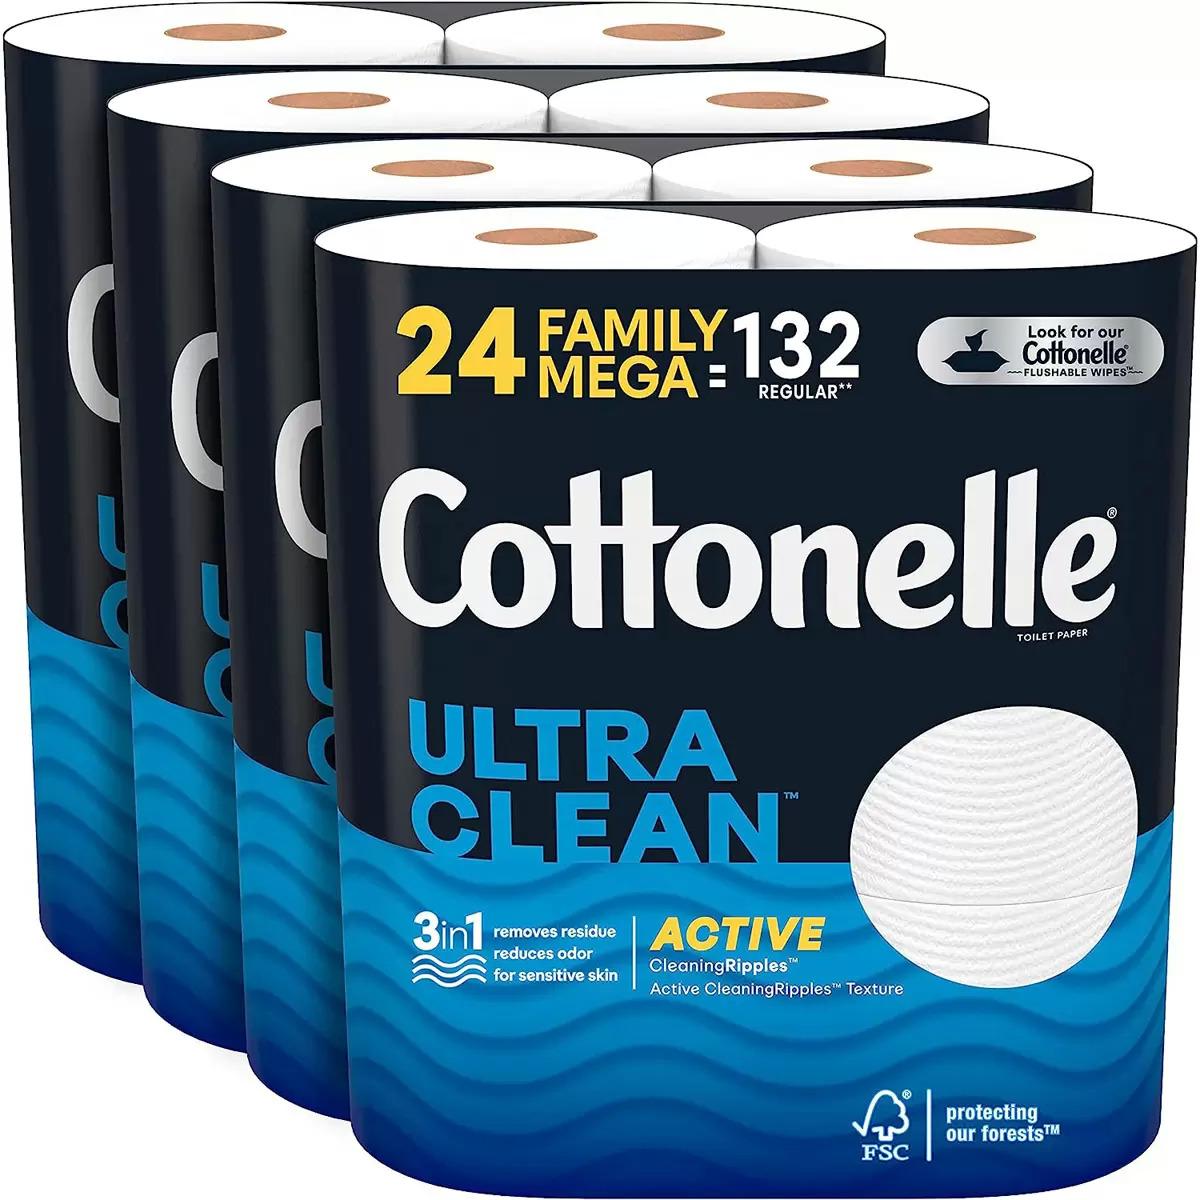 Cottonelle Ultra Clean Toilet Paper 24 Mega Rolls for $20.69 Shipped